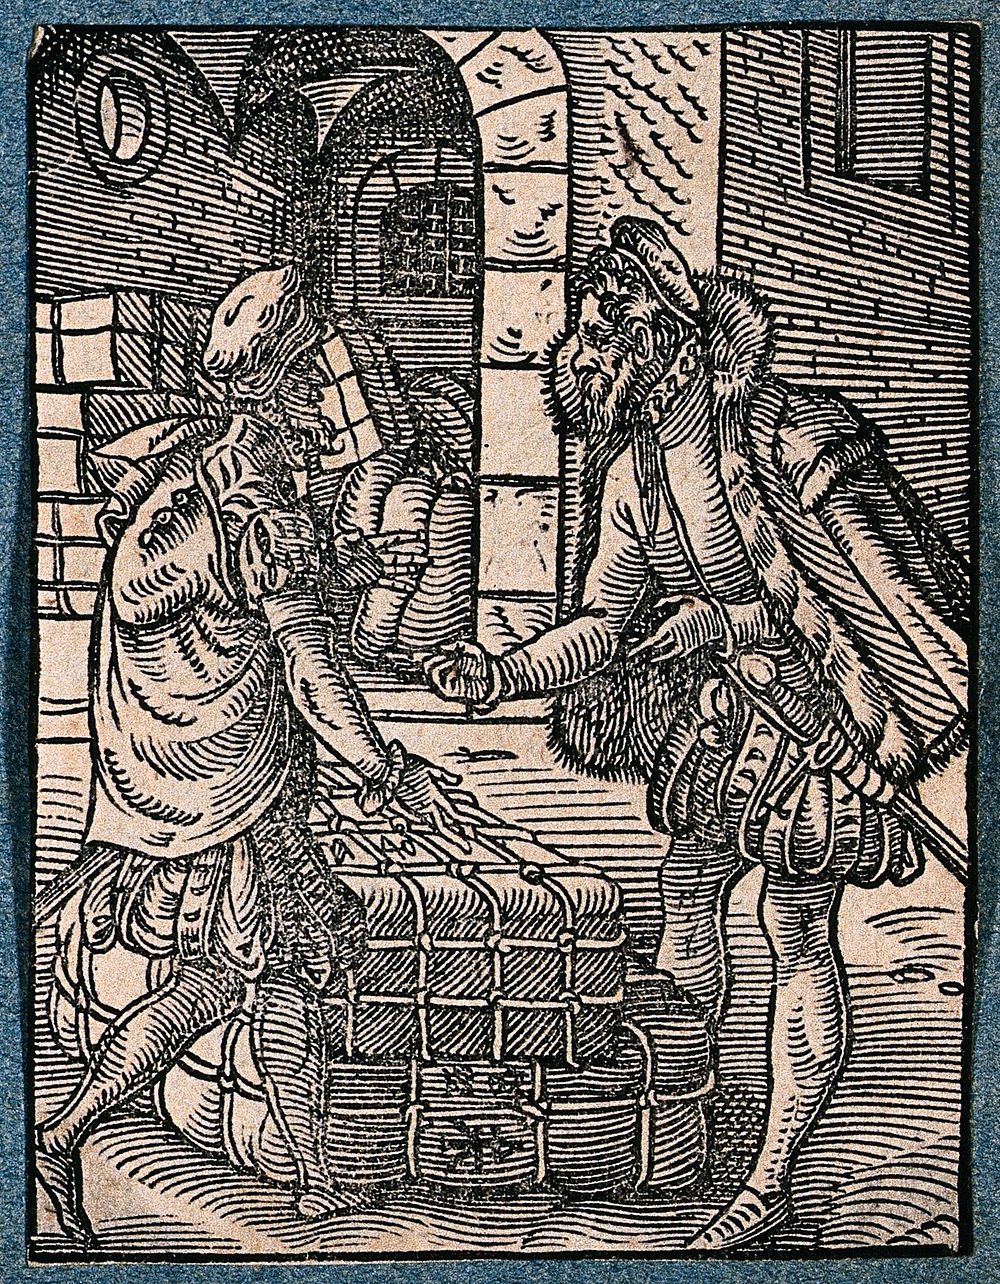 A merchant haggles with another merchant over a large bundle of goods. Woodcut by J. Amman.